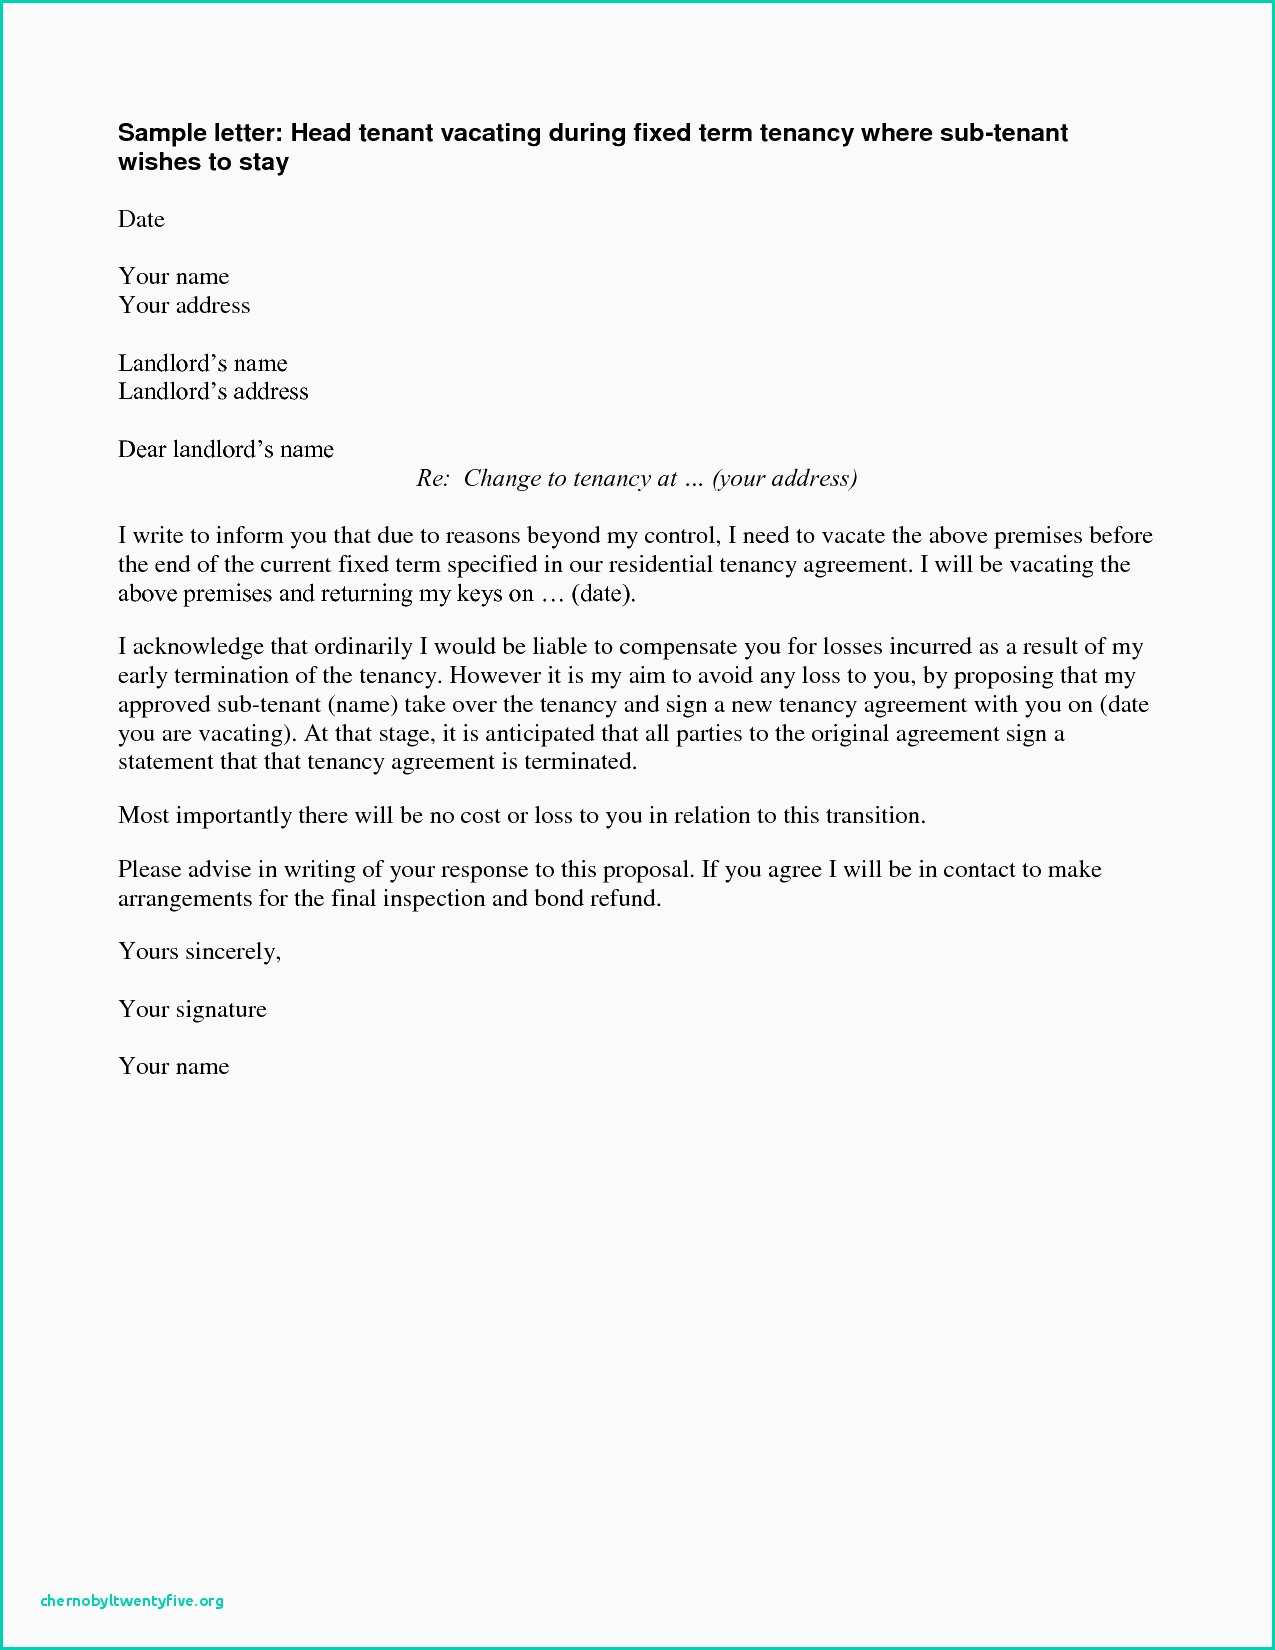 Rental Termination Letter To Tenant from mthomearts.com